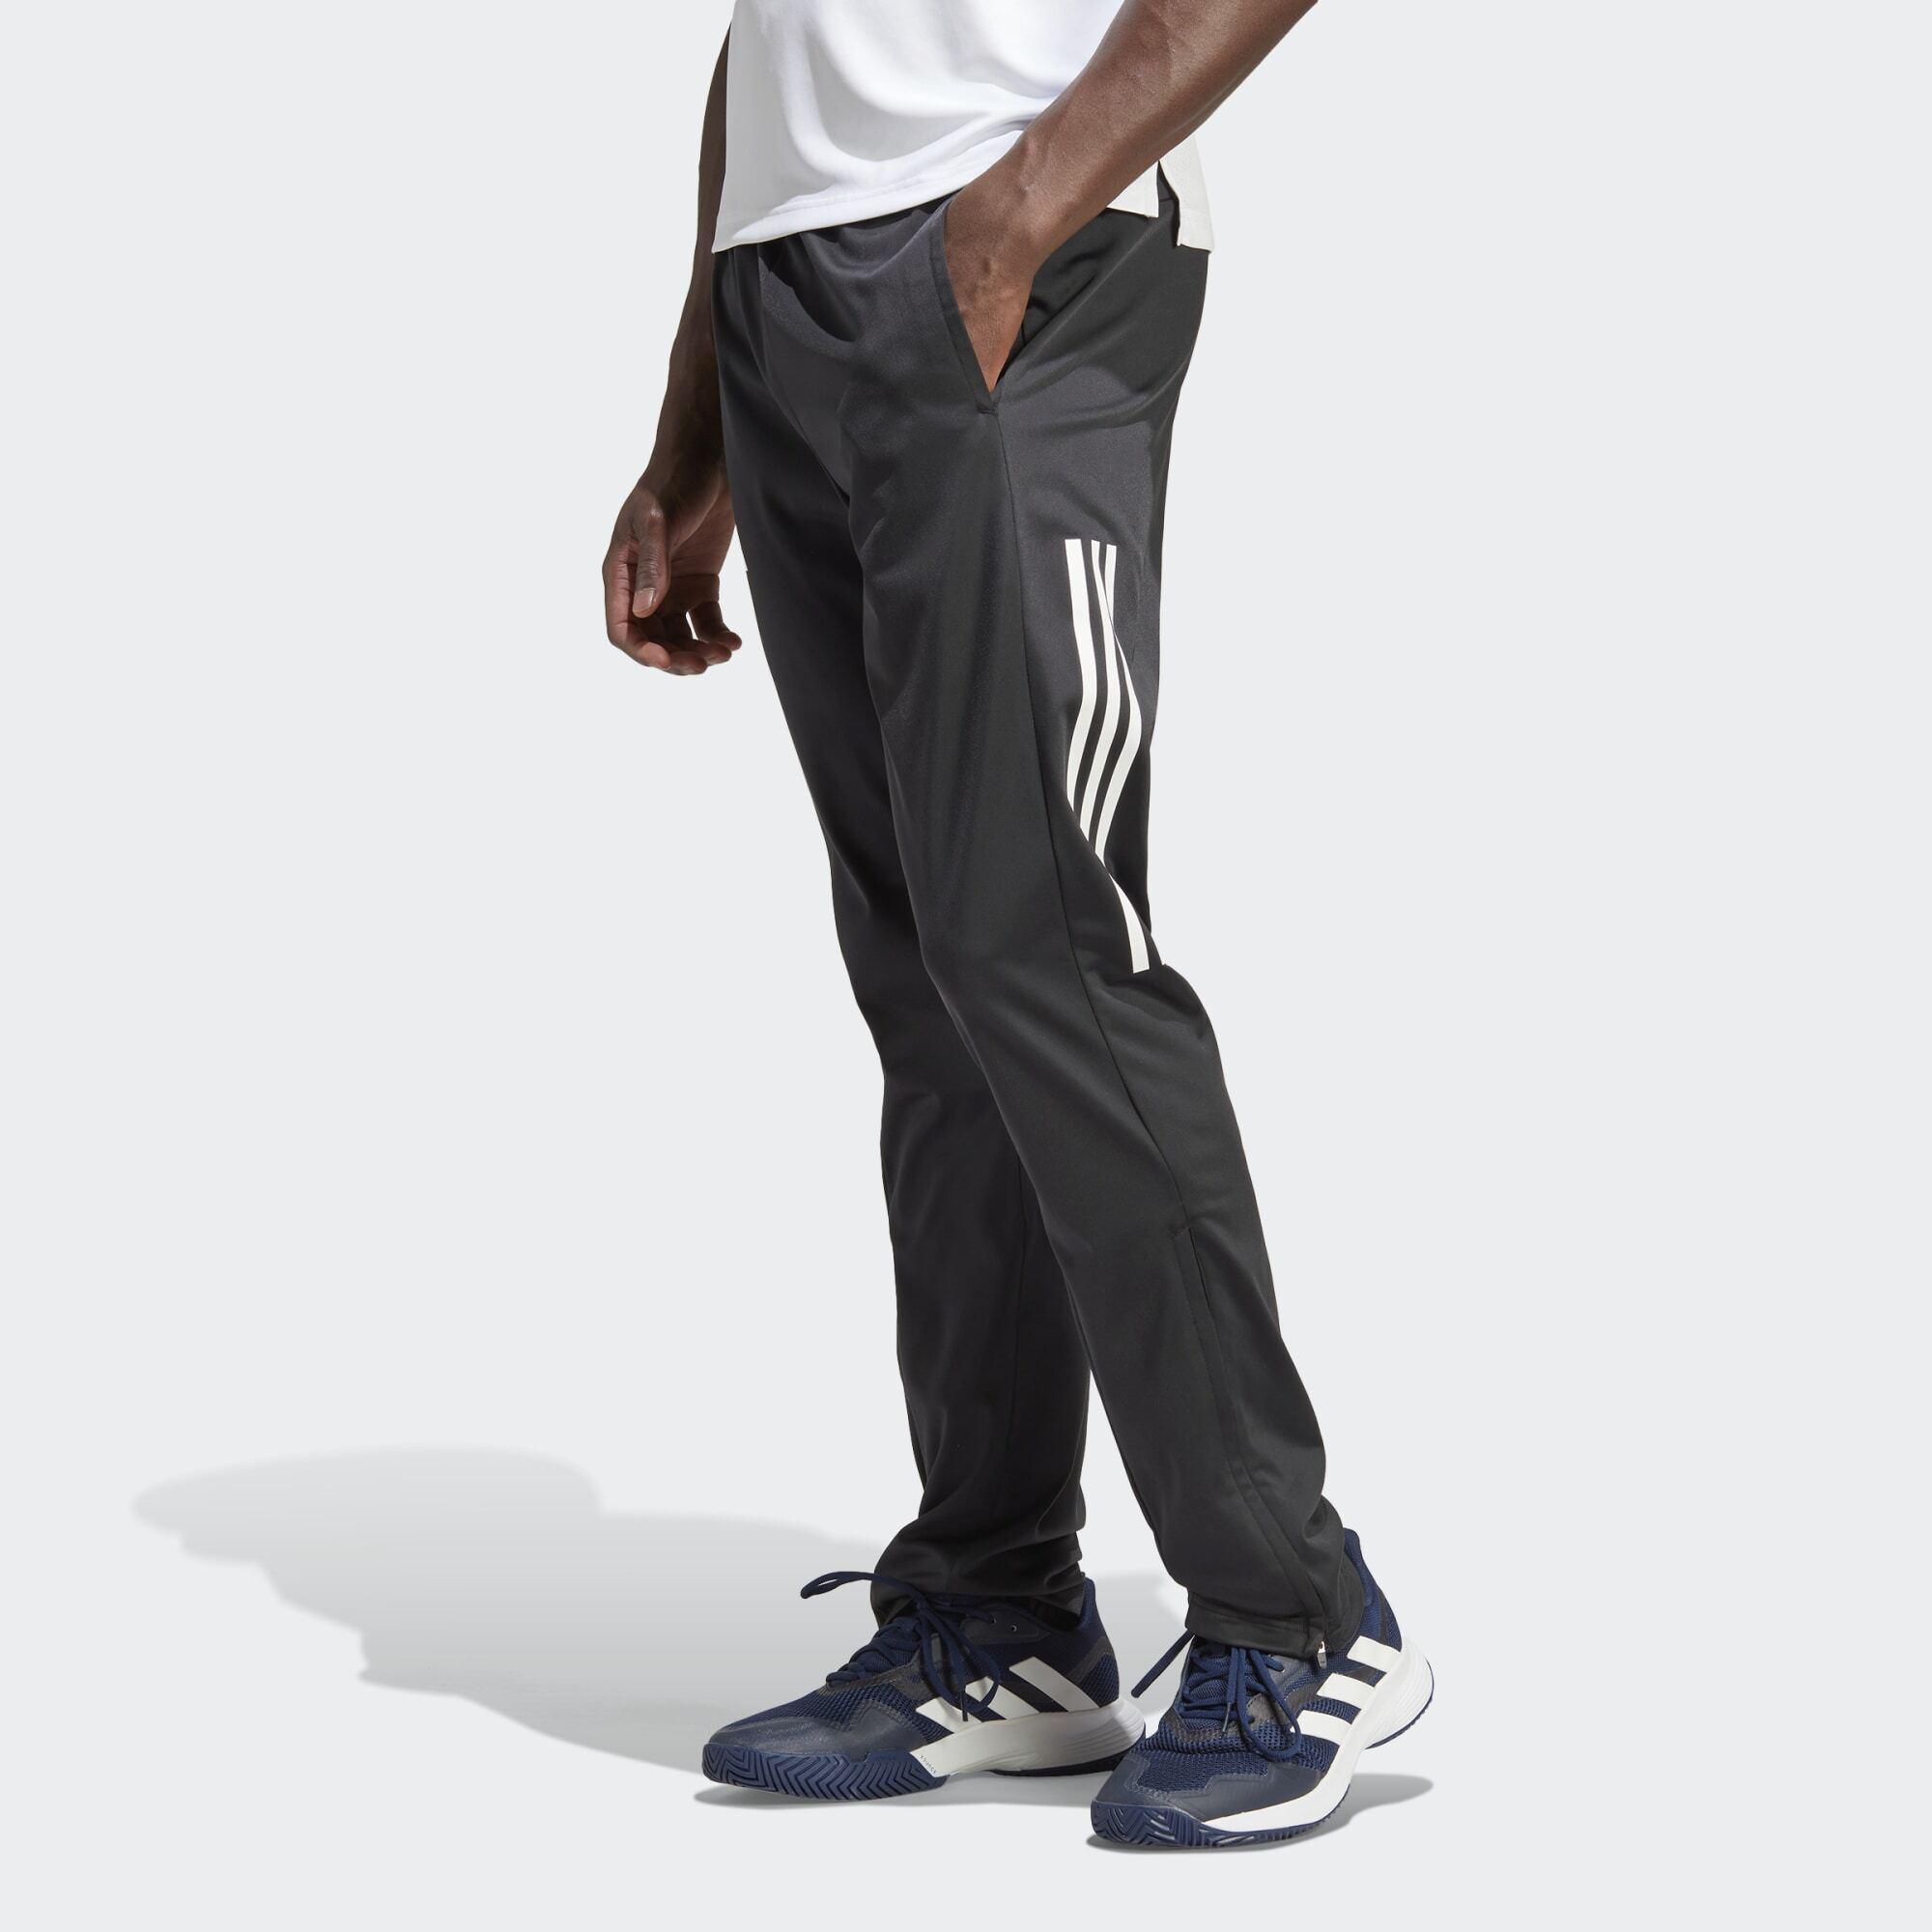 adidas 3-Stripes Knitted Tennis Pants (9000133405_1469)